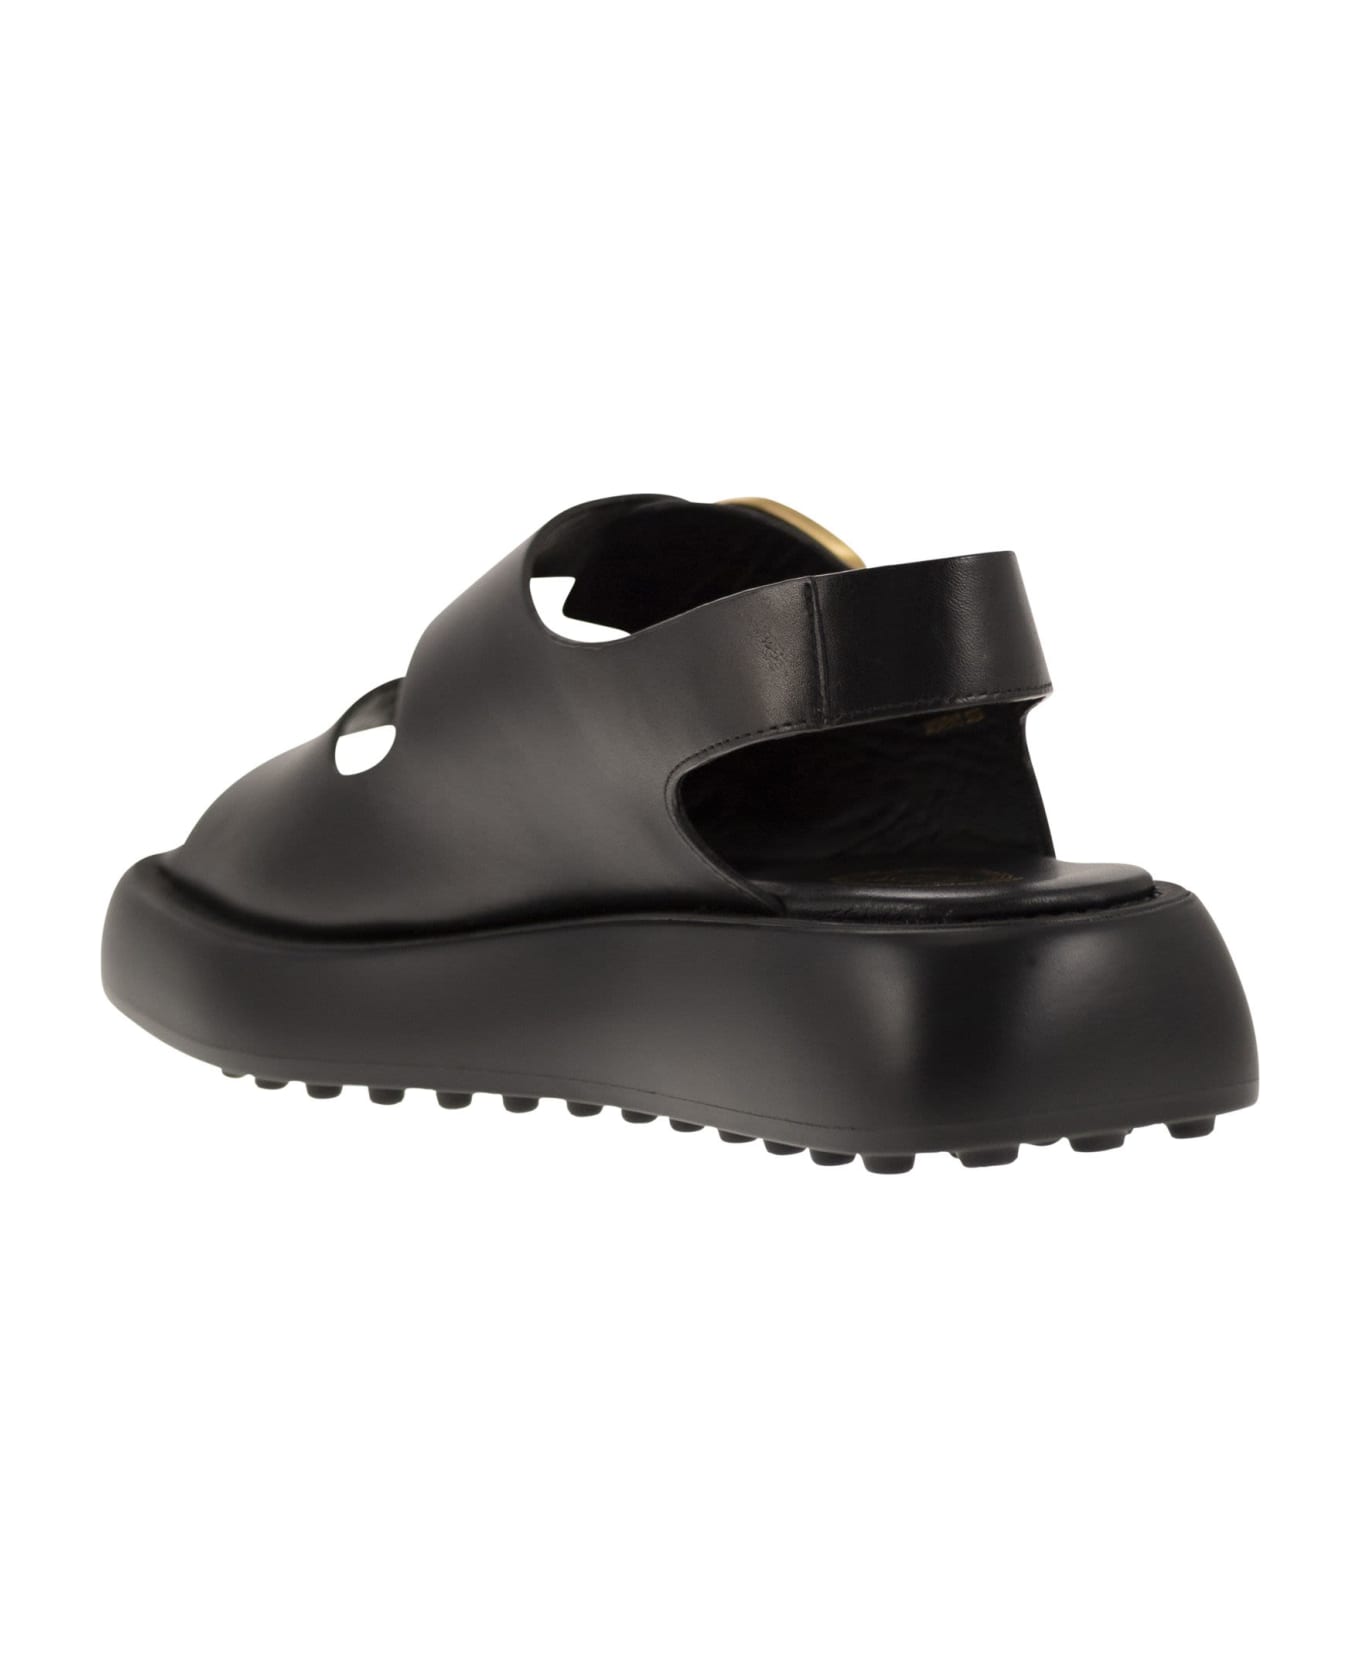 Tod's Leather Sandal With Buckles - Black サンダル